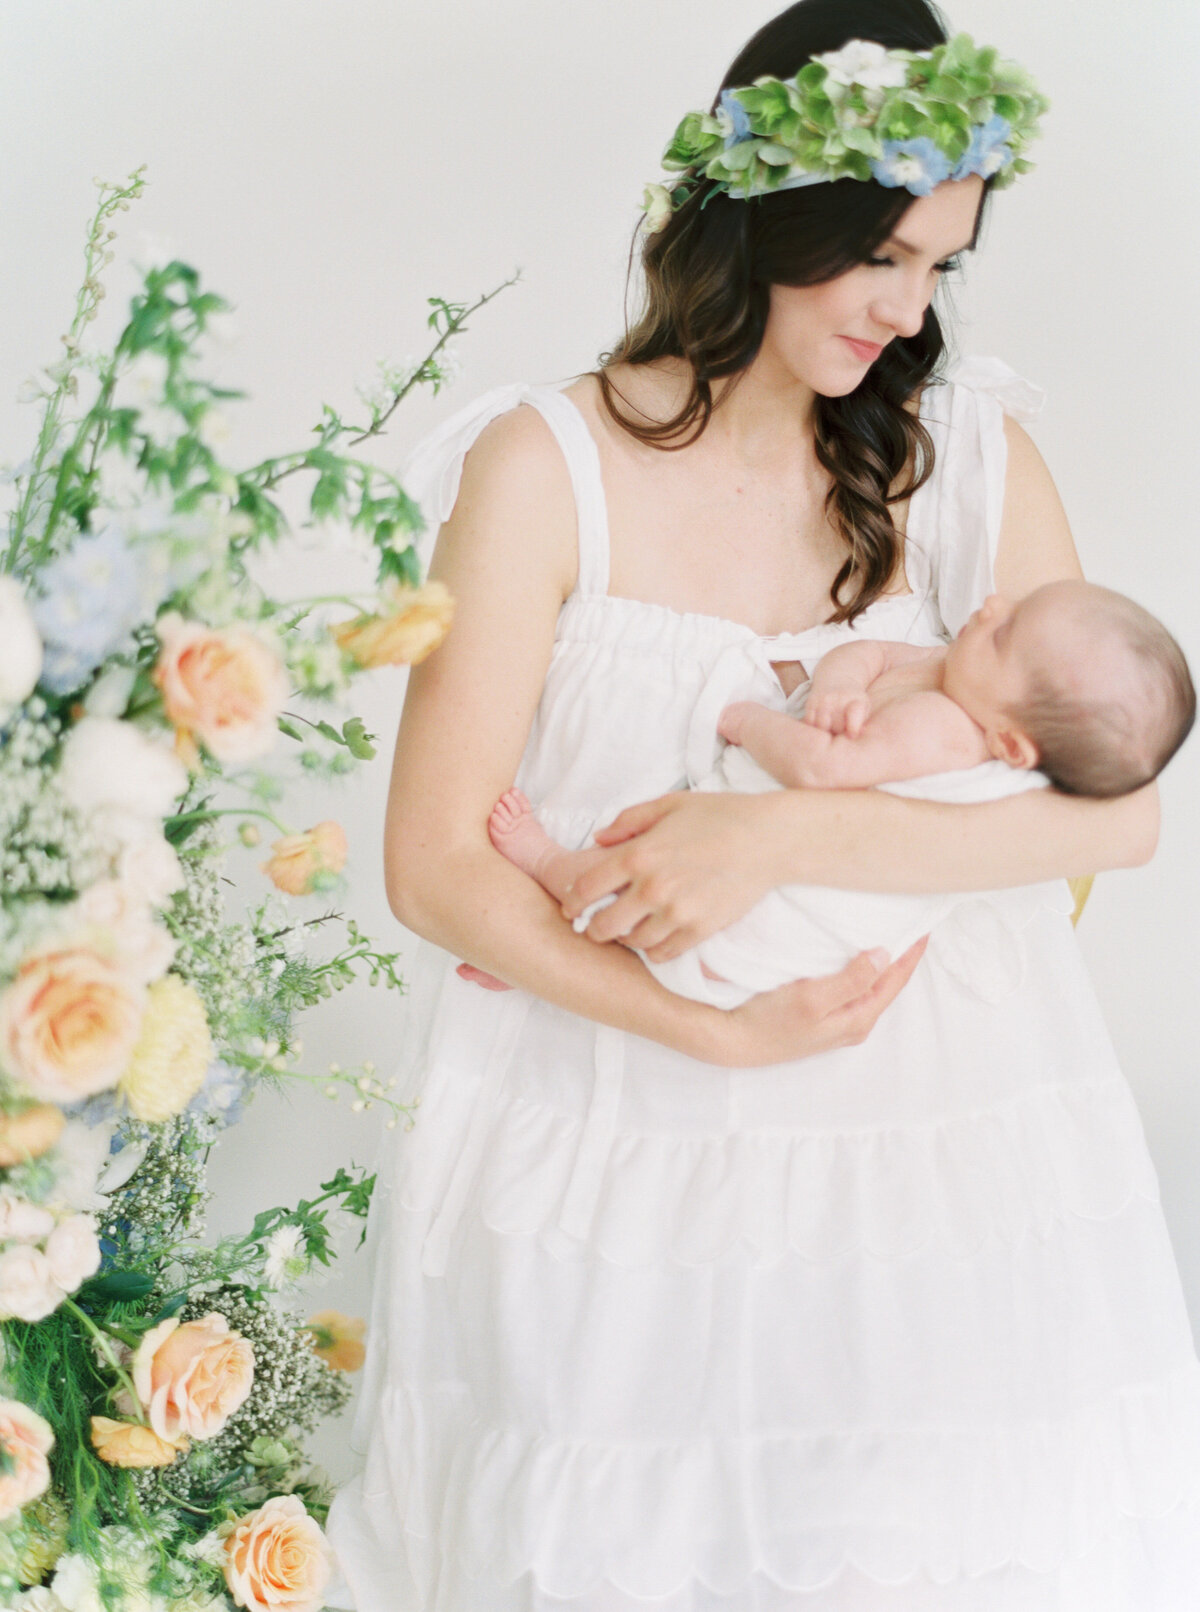 Mother with flower crown holding newborn baby